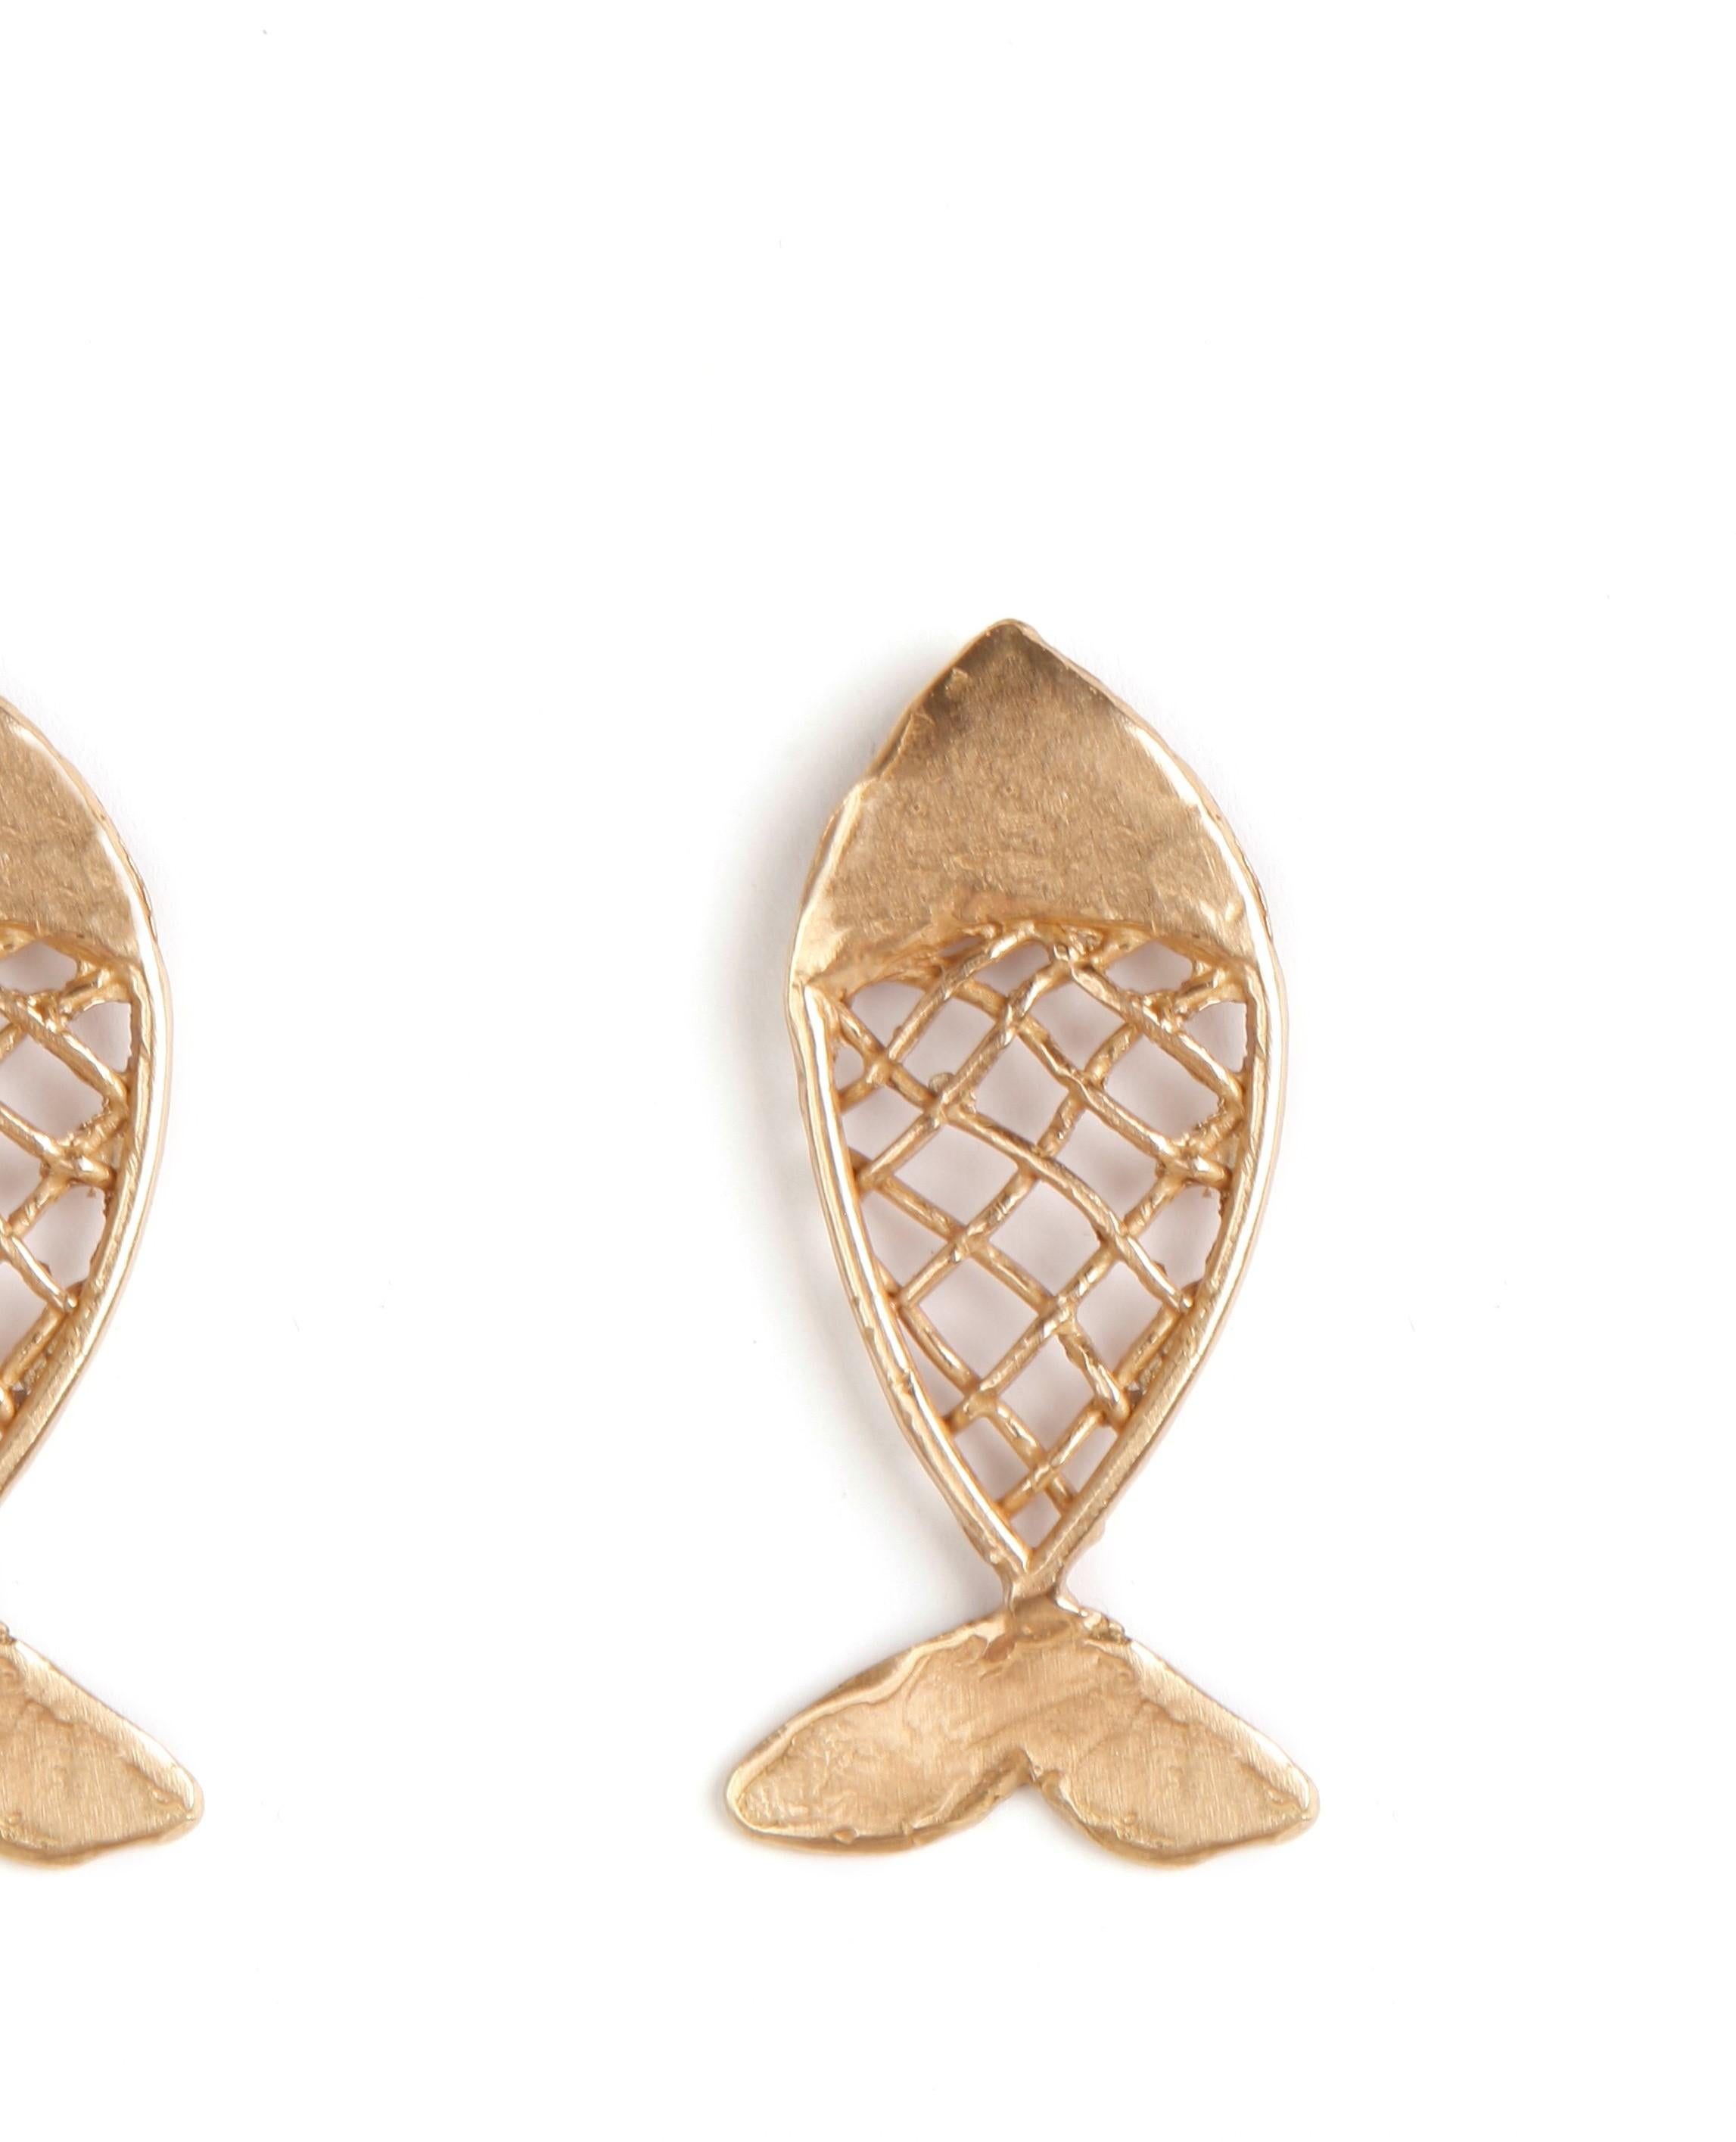 Giulia Barela Gold Plated Bronze Fish Earring In Excellent Condition For Sale In Rome, IT